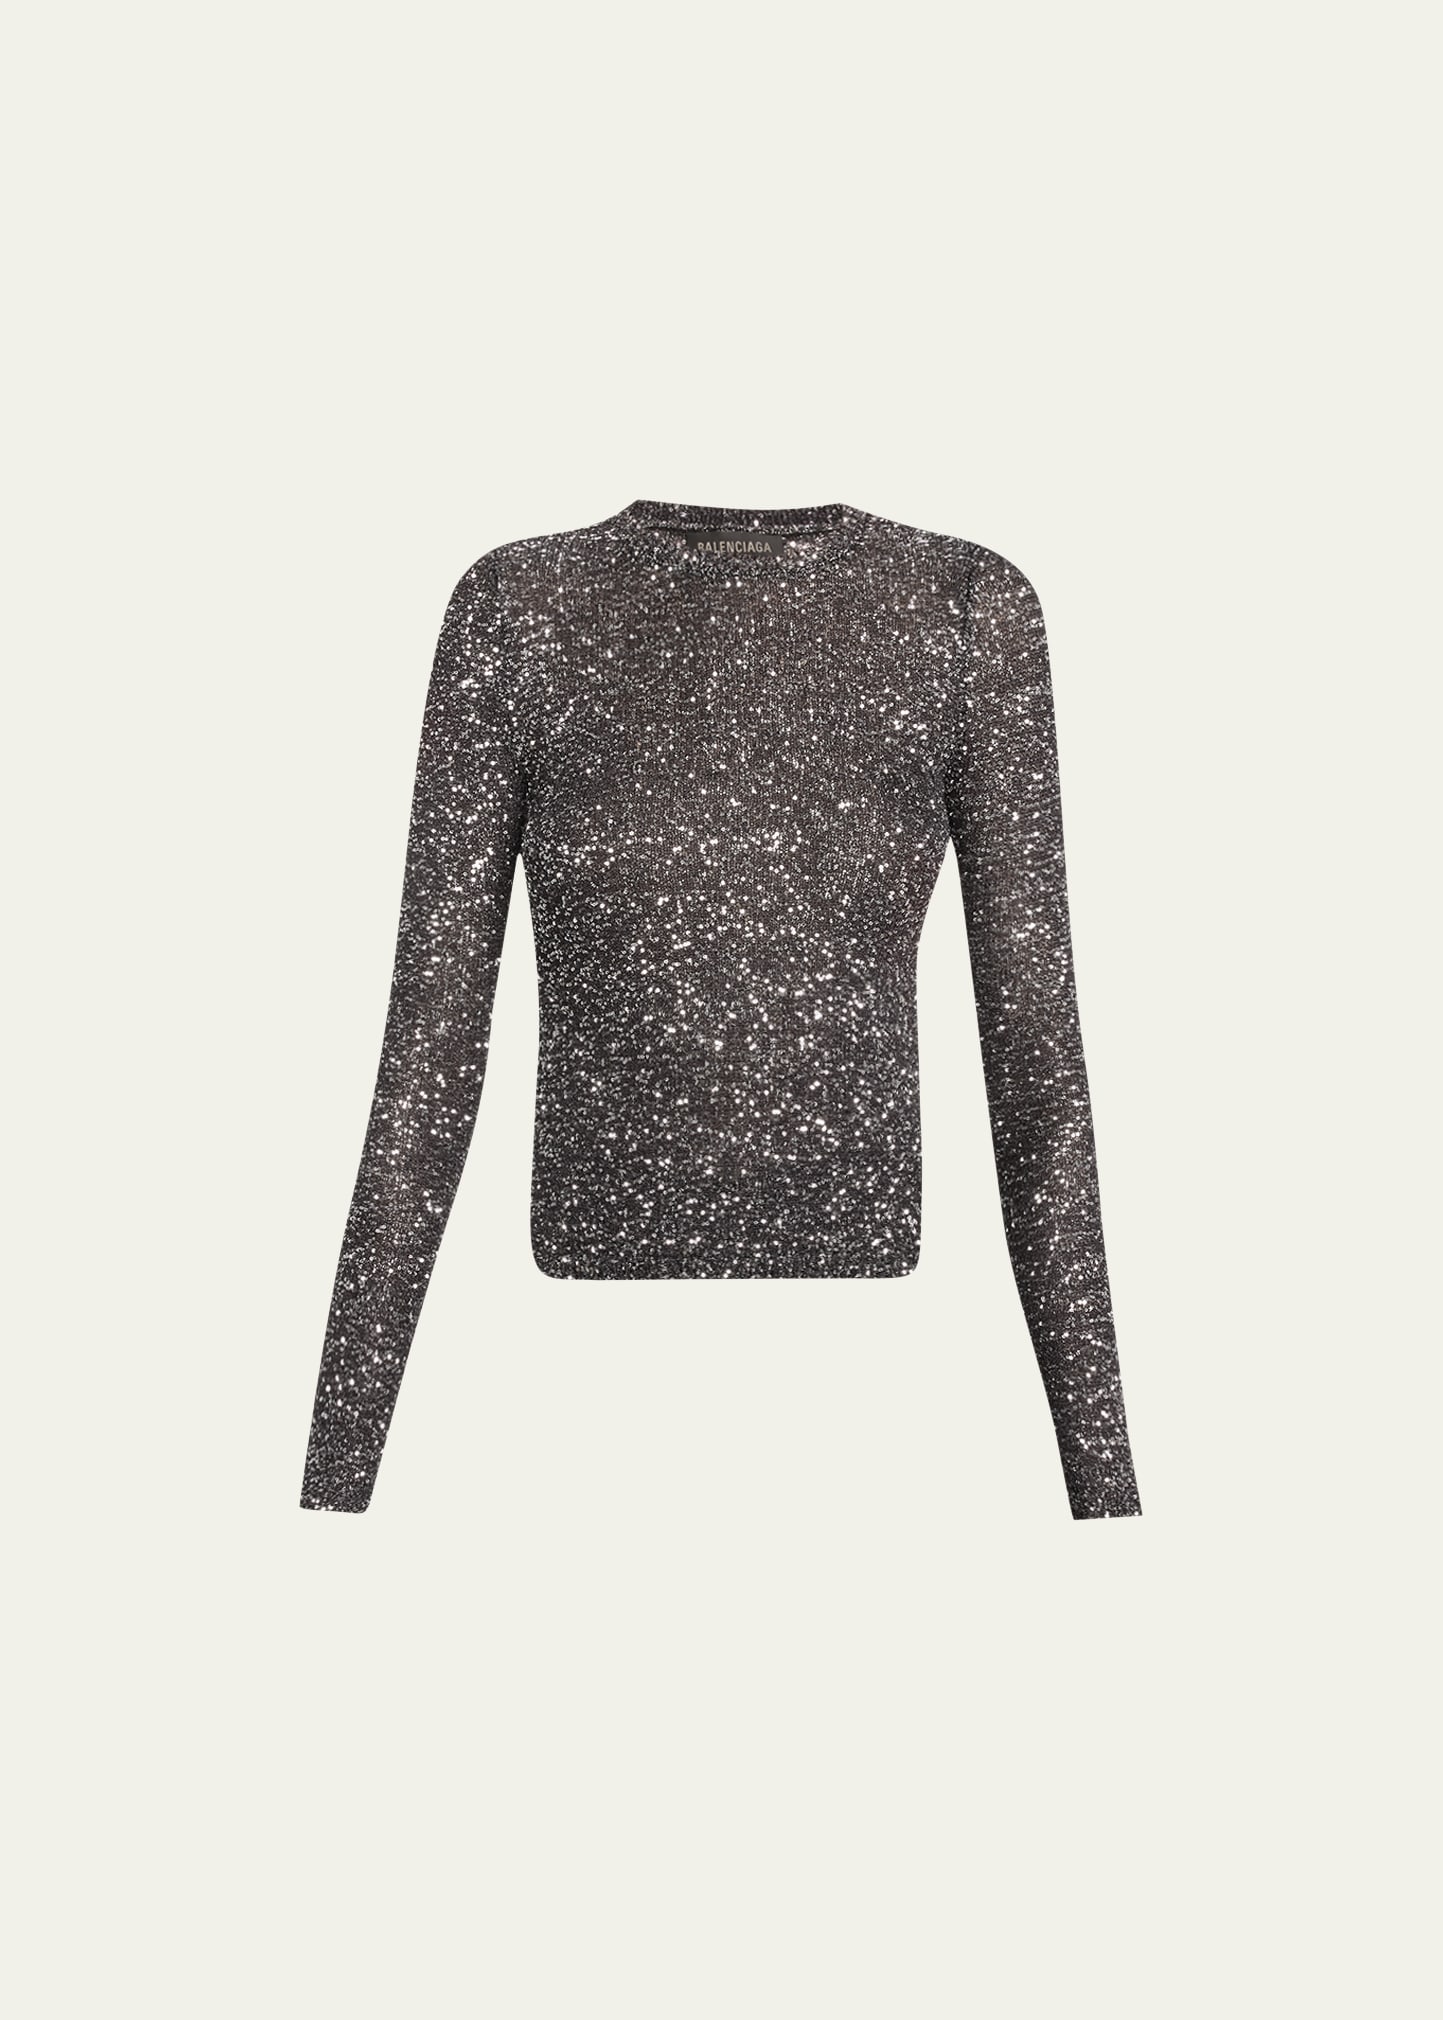 Balenciaga Embellished Fitted Crew-neck Sweater In Noir Multi